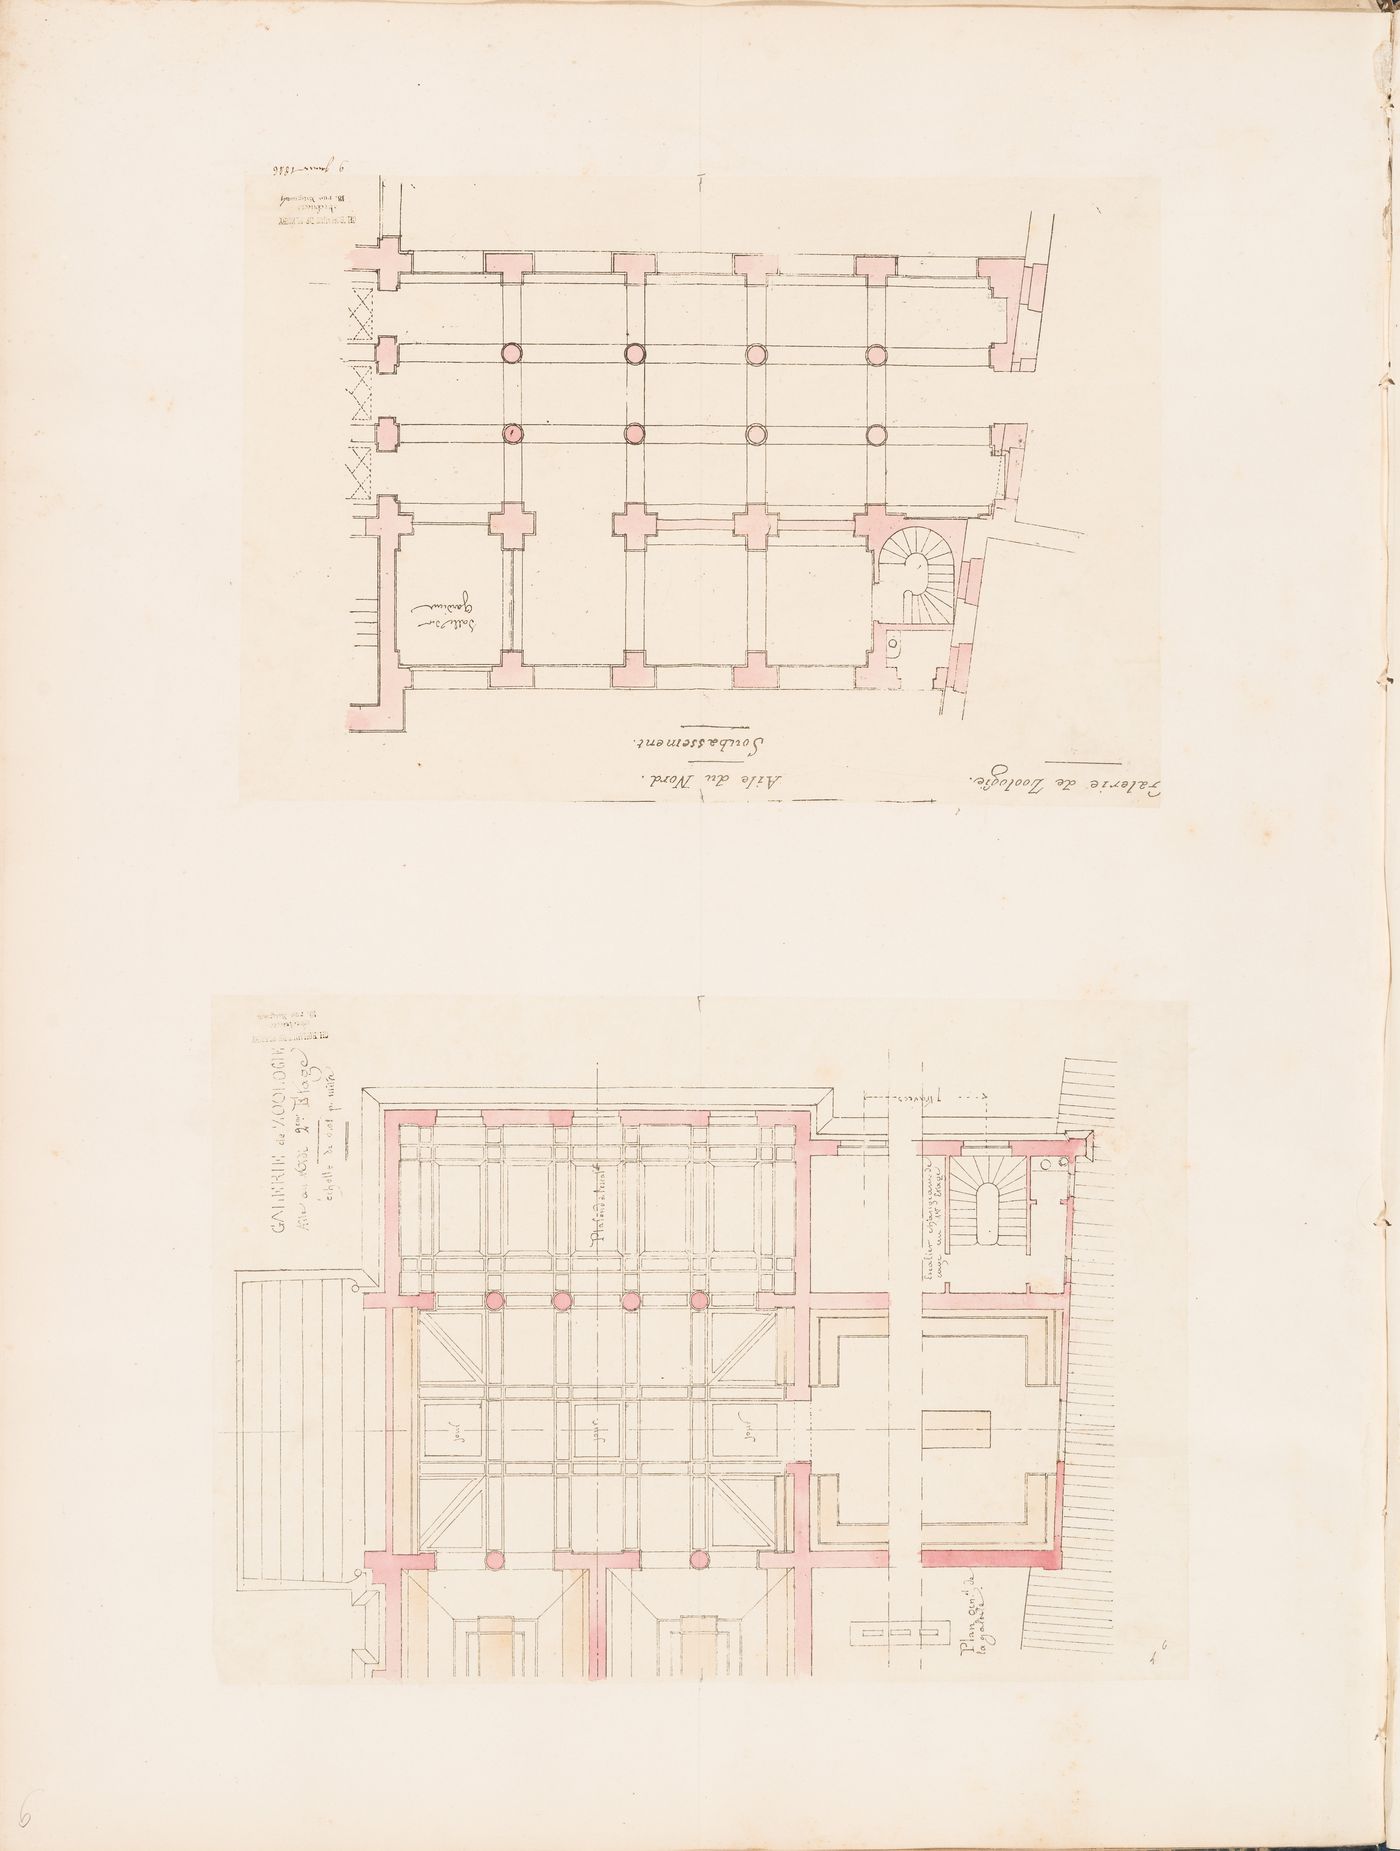 Project for a Galerie de zoologie, 1846: Plans for the second floor for the south wing and the "soubassement" for the north wing